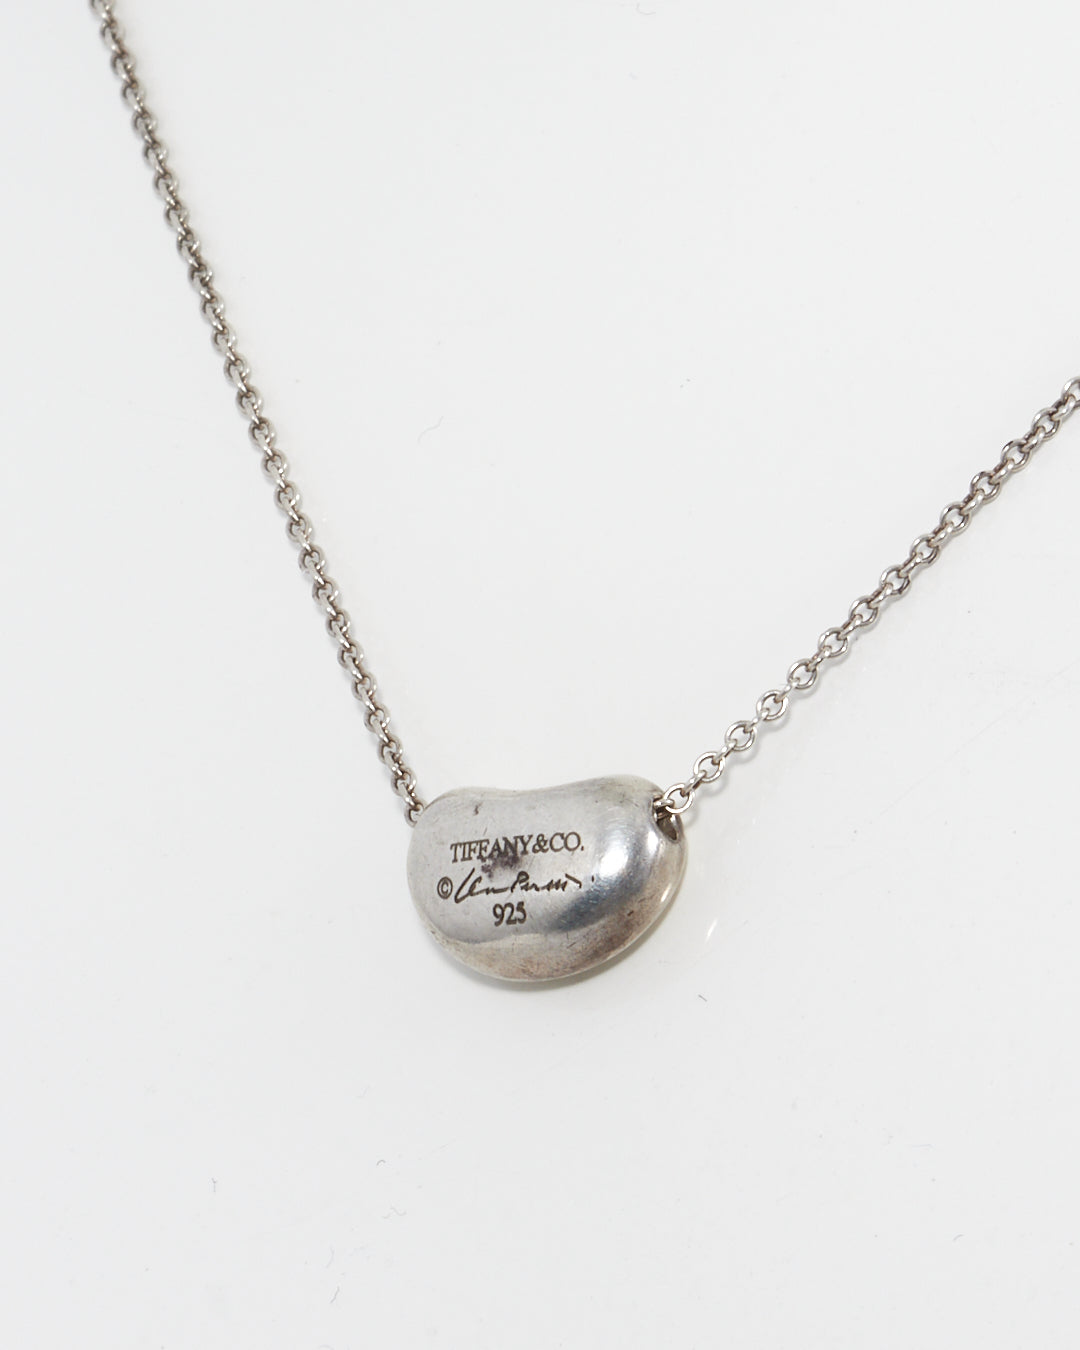 Tiffany & Co Sterling Silver Small Bean Necklace